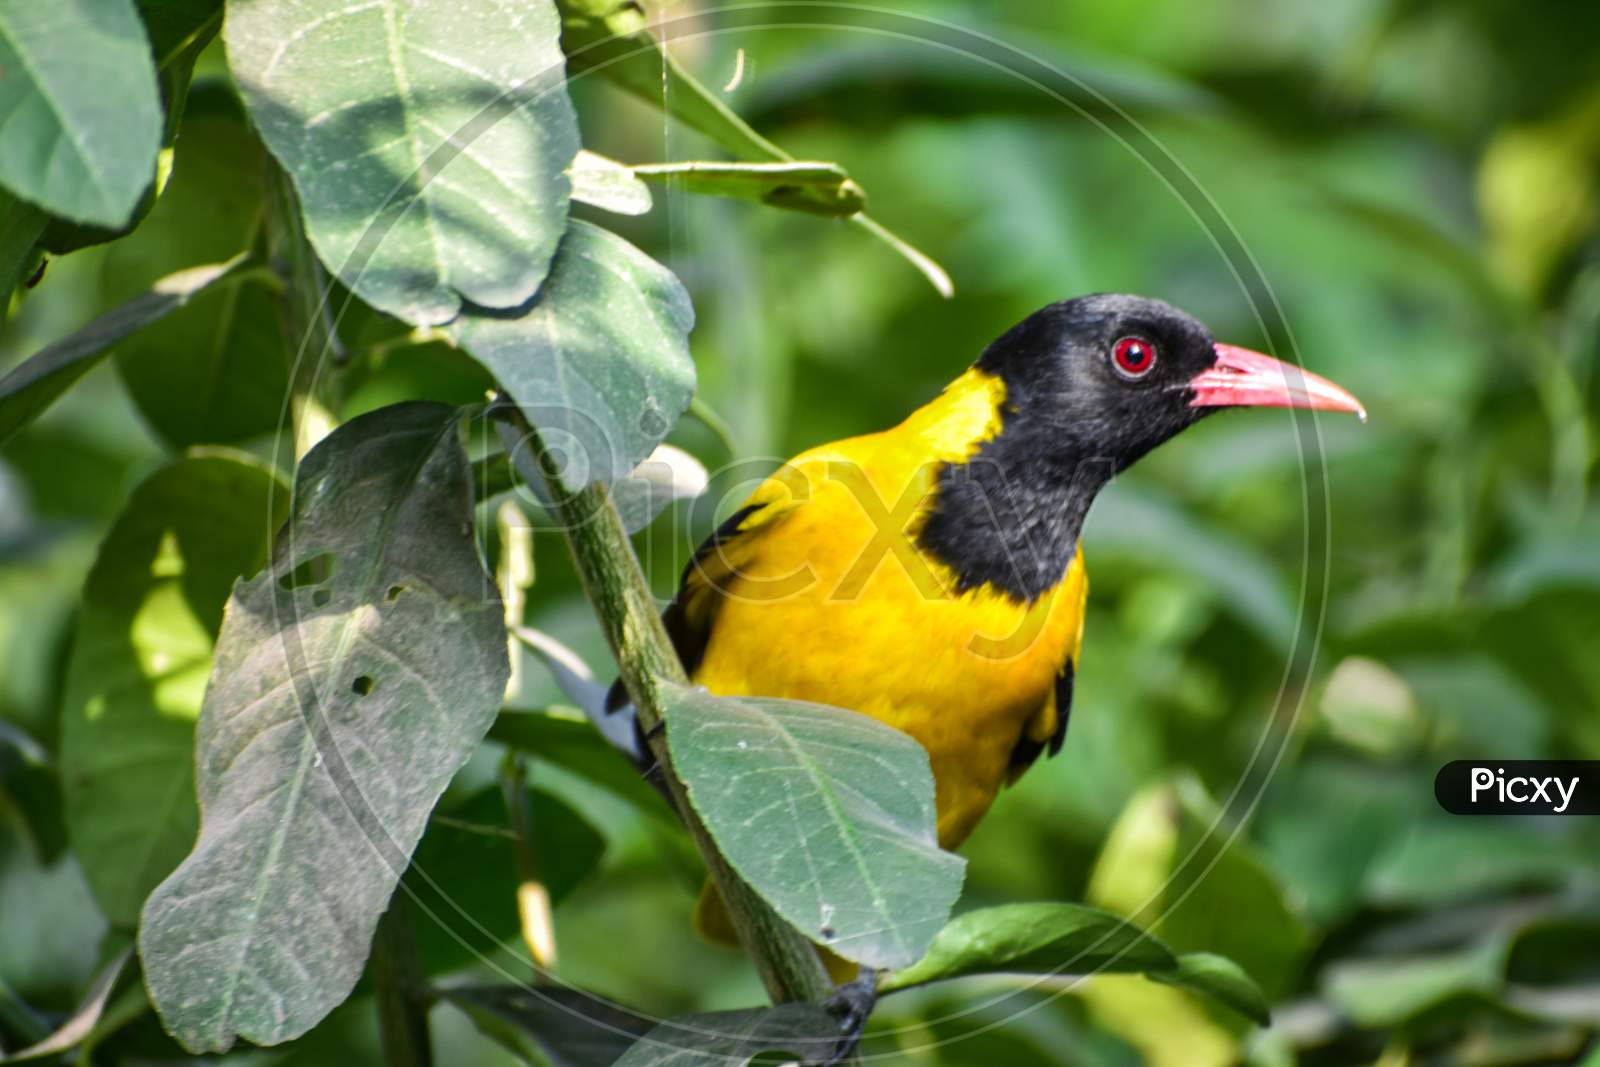 The Black-Headed Oriole Is A Species Of Bird In The Family Oriolidae. It Is Found In Africa And Has A Very Striking Appearance With A Bright Yellow Body, Contrasting Black Head And Flesh Coloured Beak.